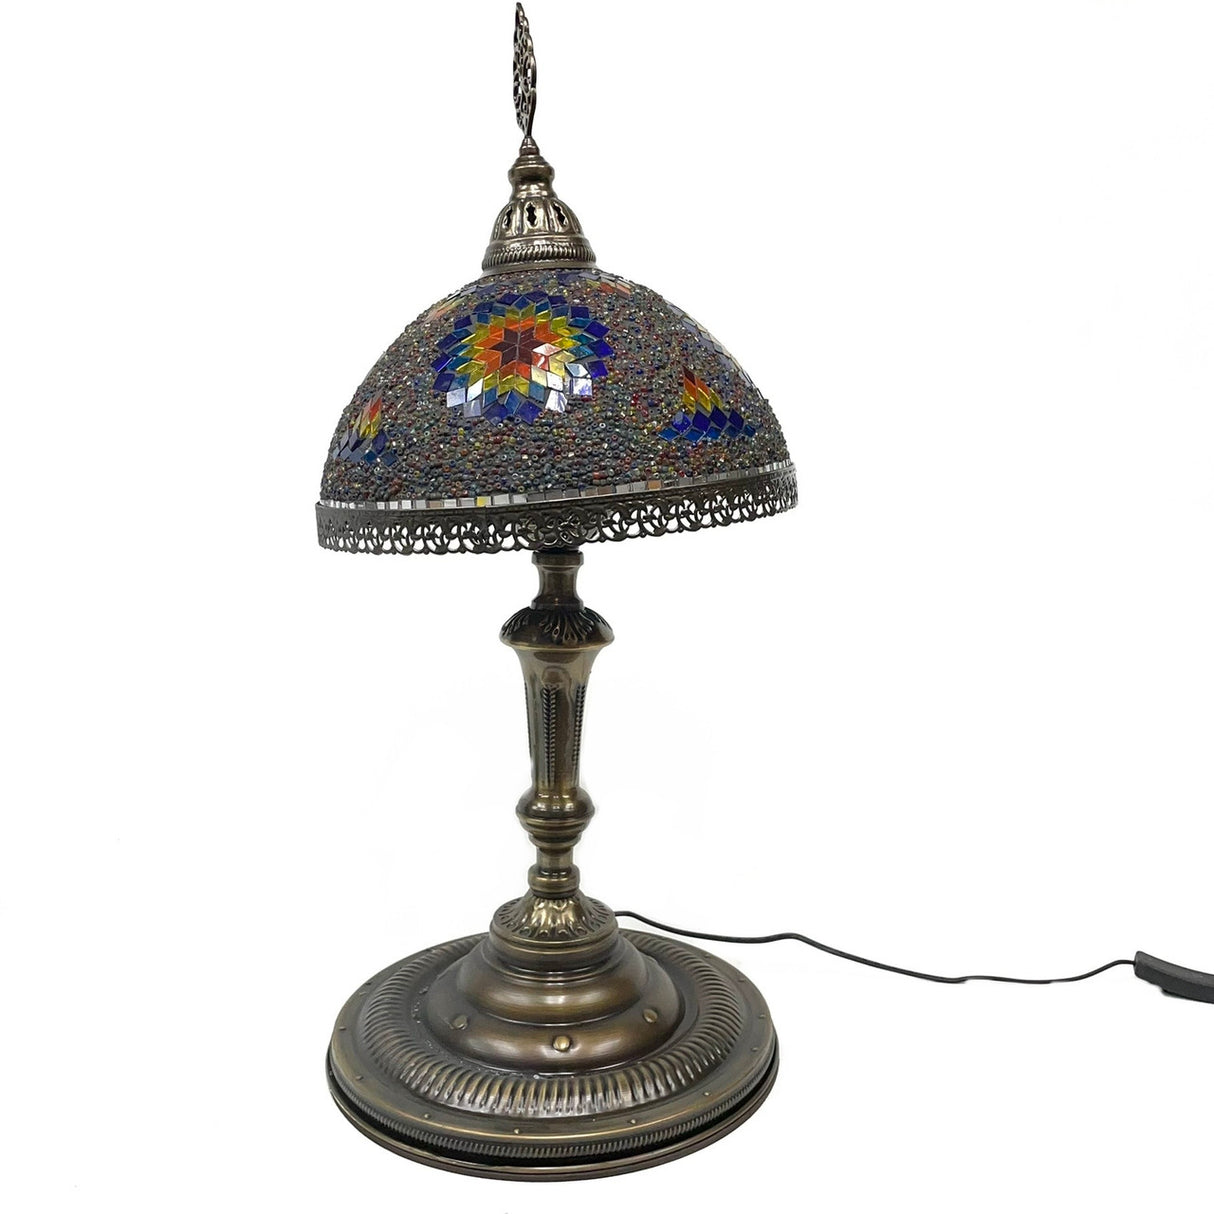 Large Tiffany Style Turkish Mosaic Lamp 24" x 11.75" 1 Count Assorted Colors